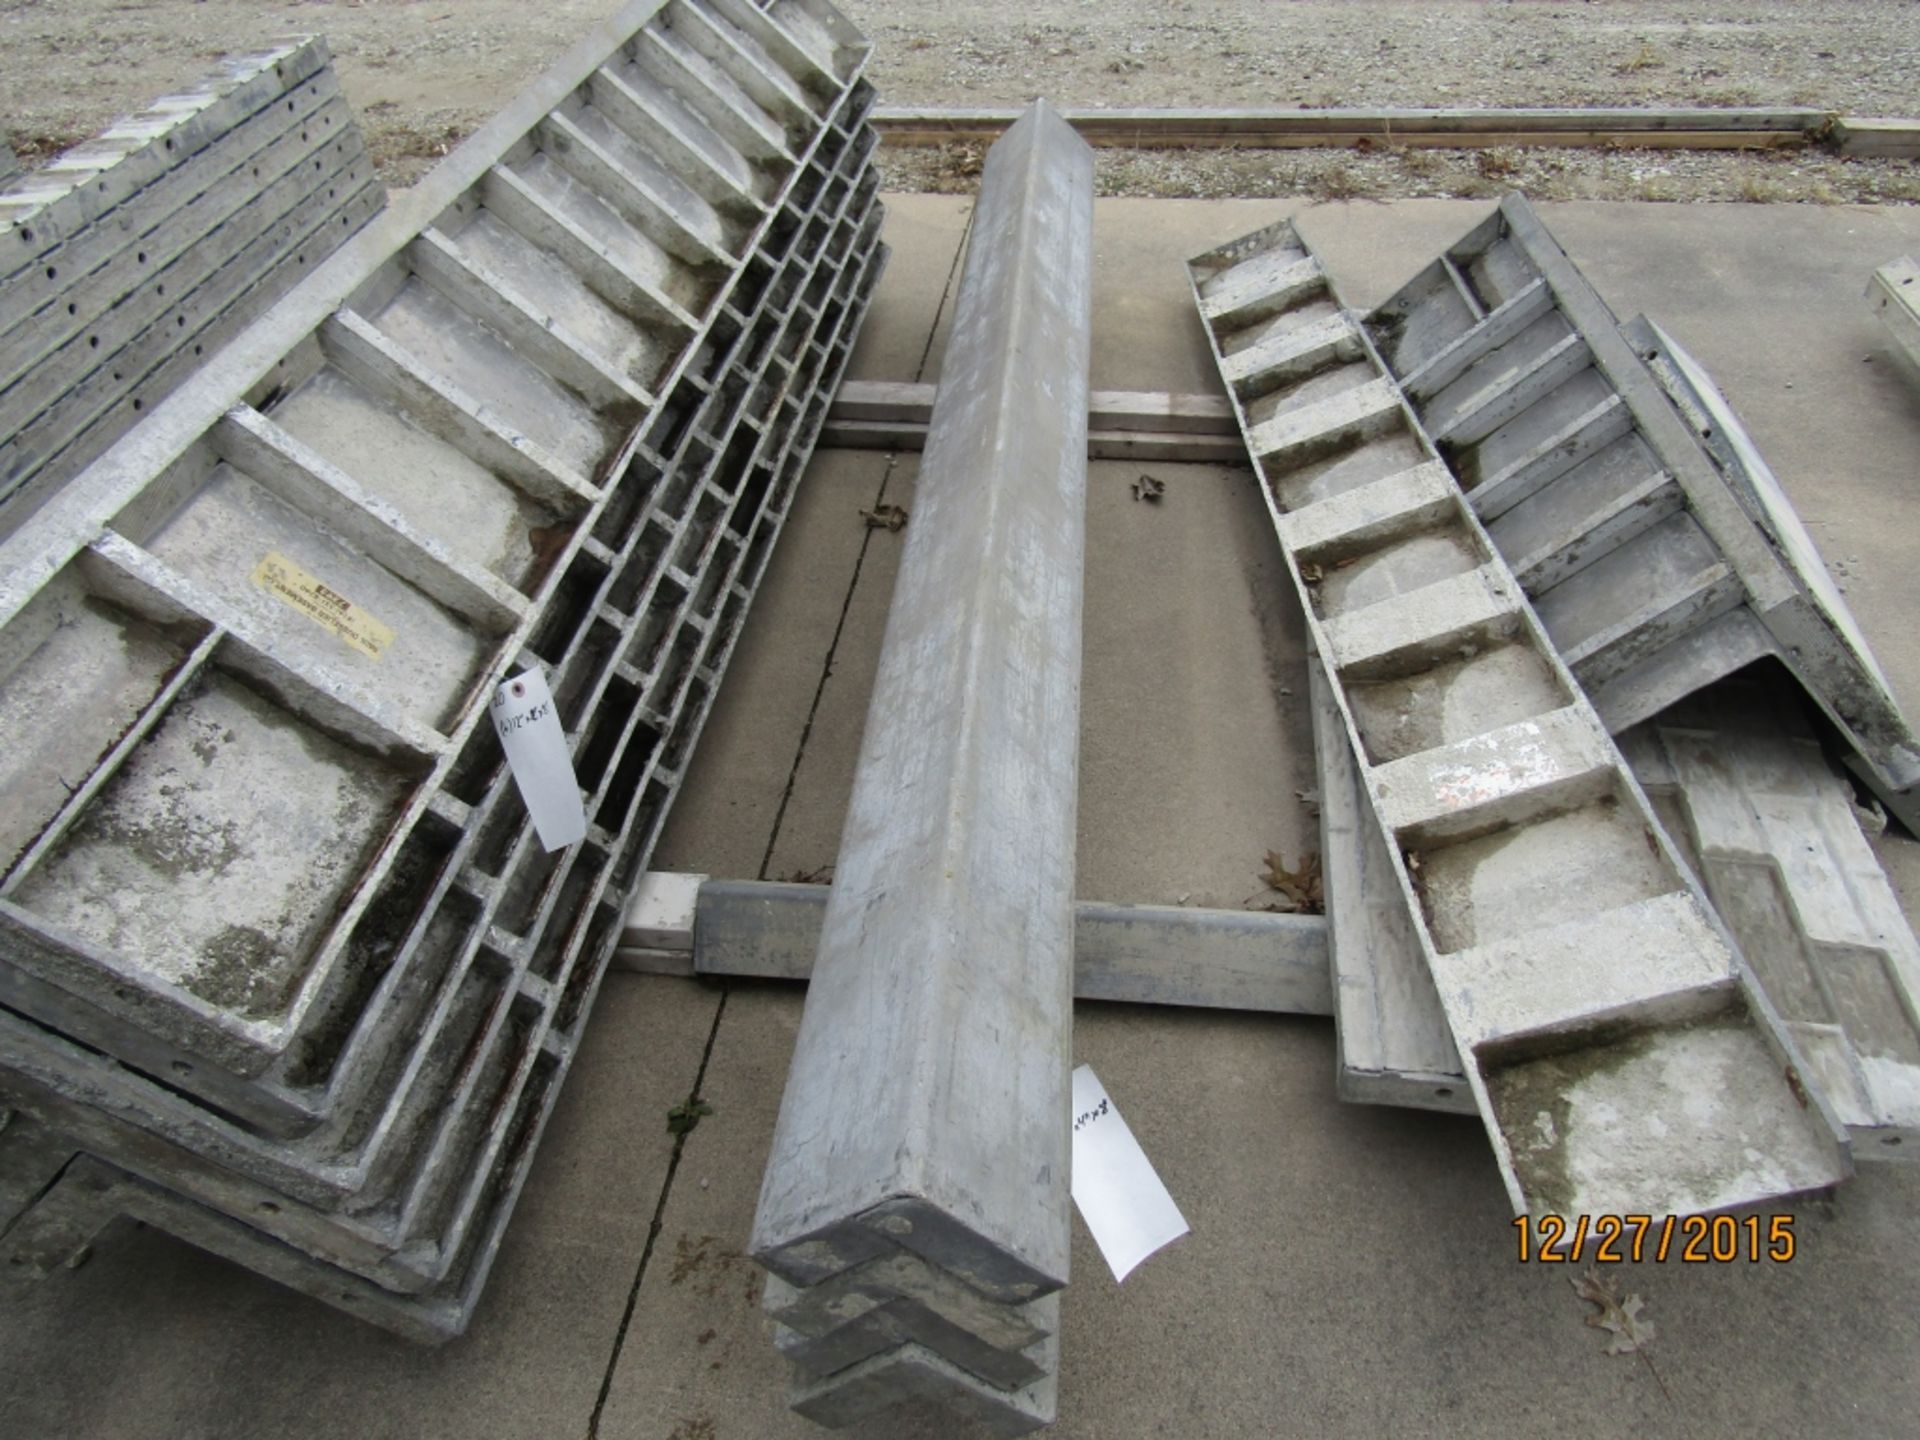 (4) 4"x4"x8' Nominal ISC Wall-Ties Concrete Forms, Smooth 8" Hole Pattern, Located in Mt.